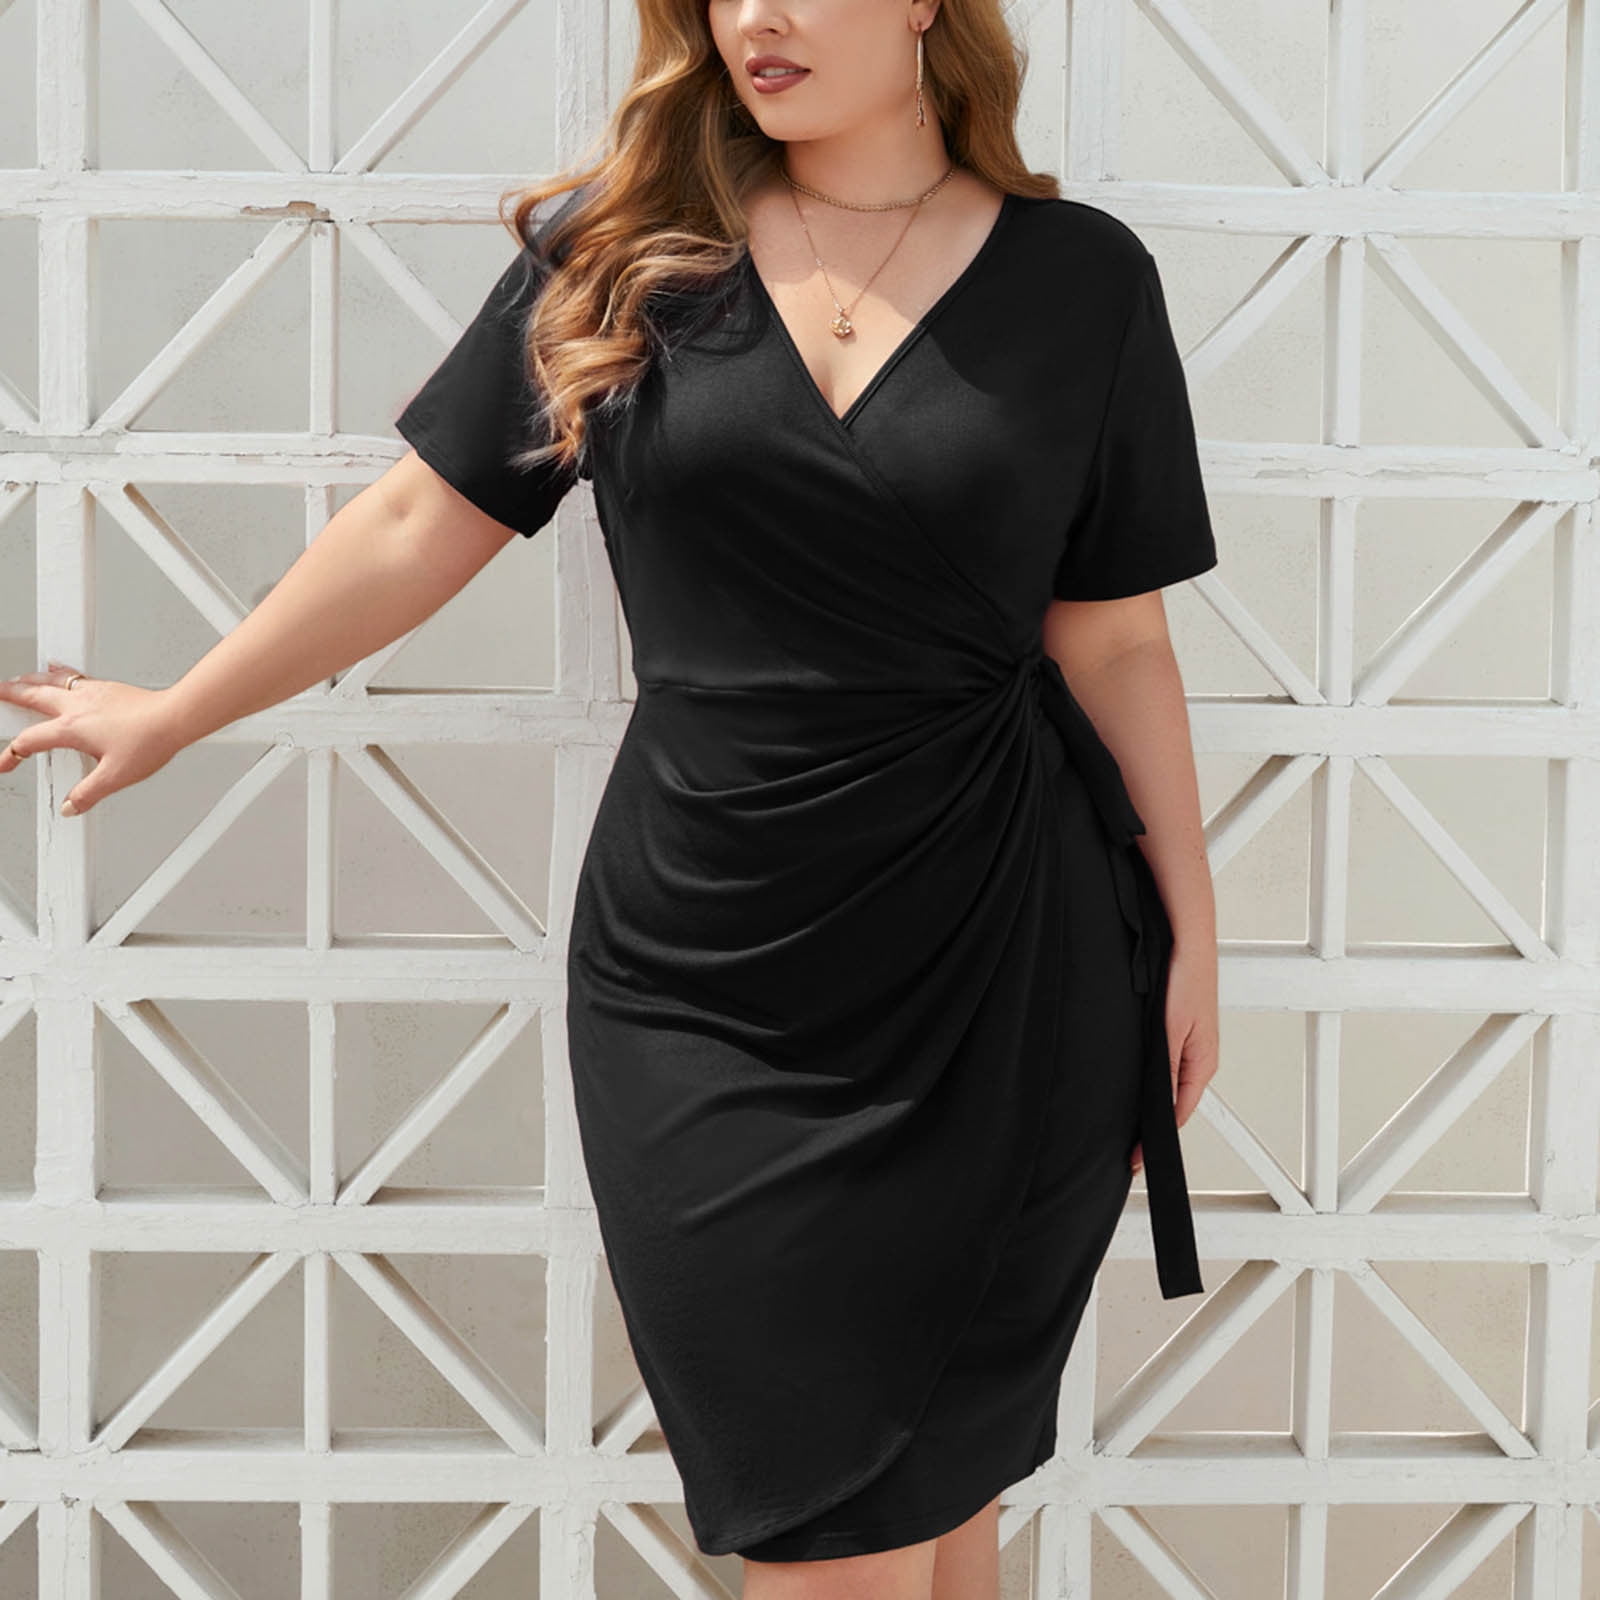 plus size black cocktail dresses with sleeves